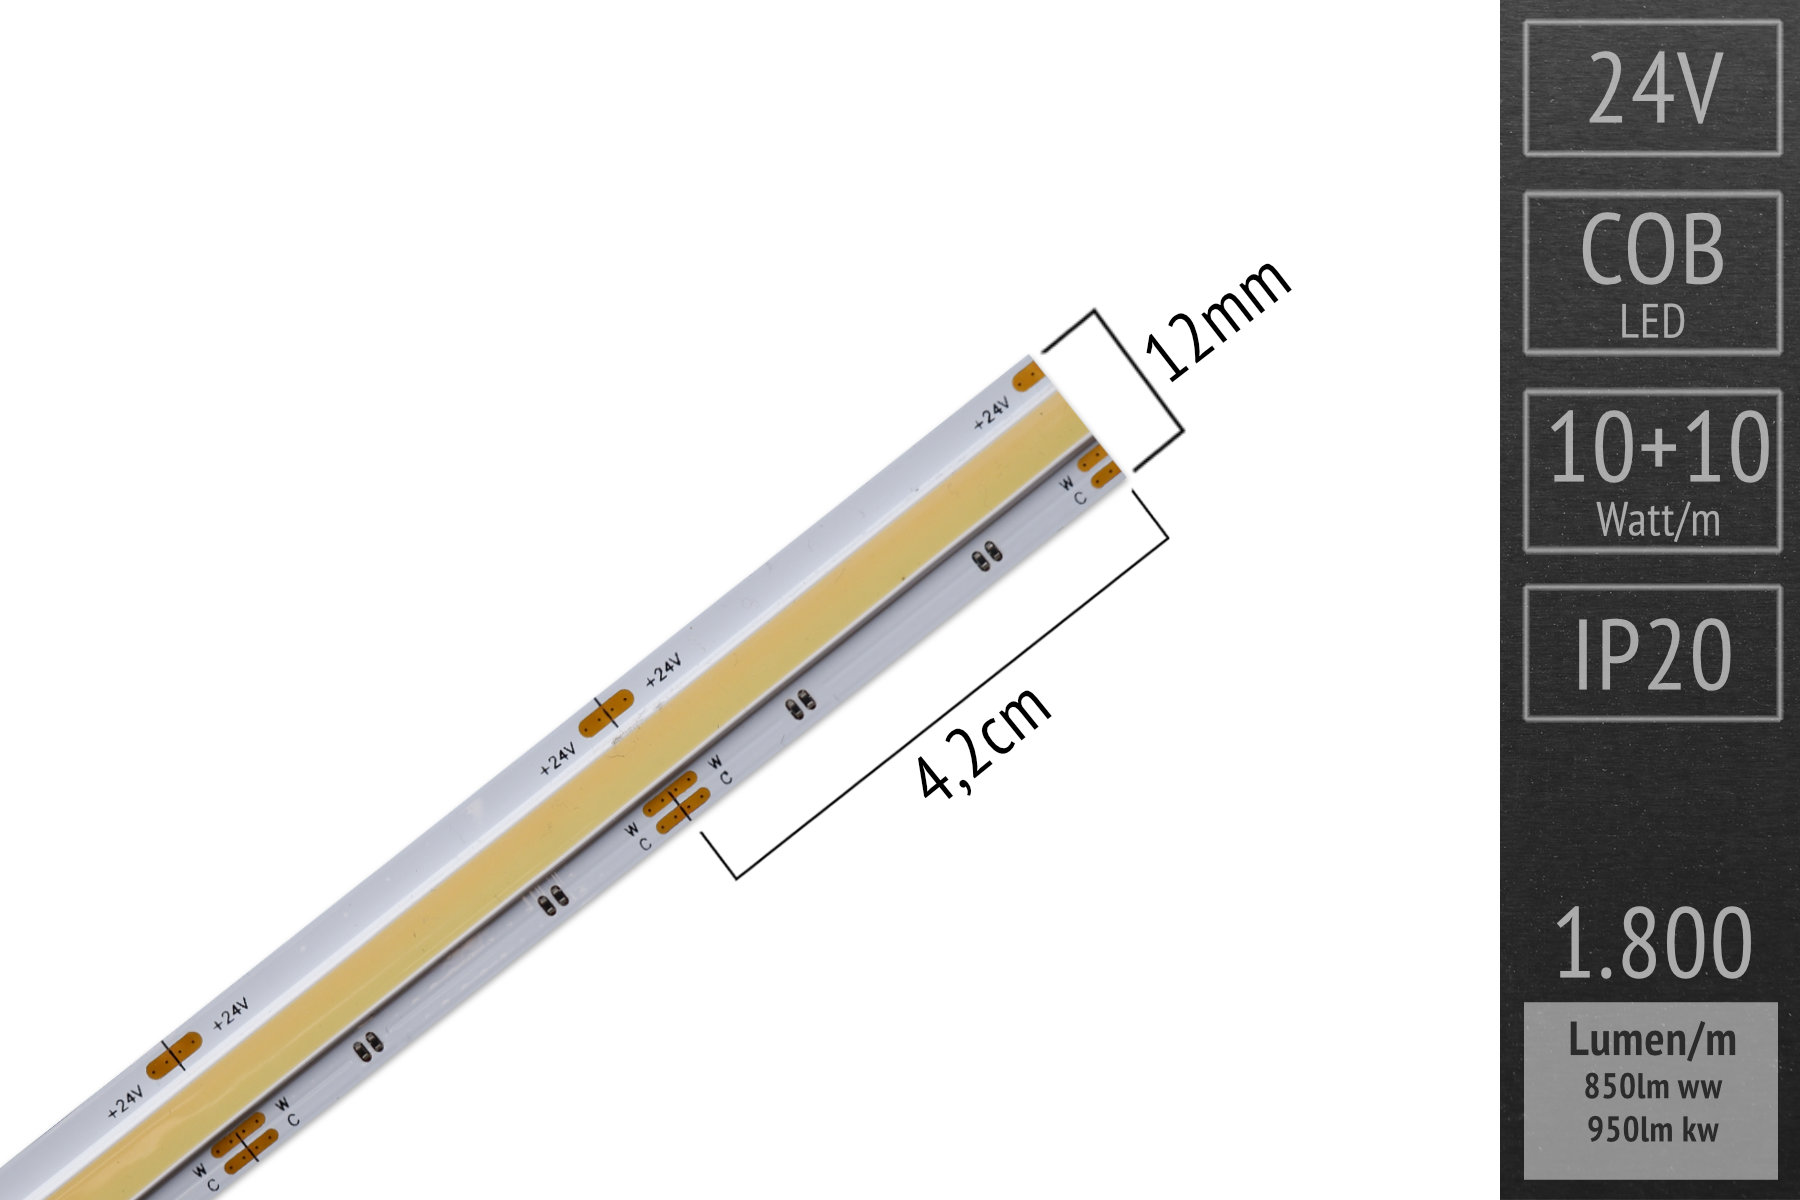 Novelty: COB LED strips with adjustable color temperature (CCT): 24 volts - CRI>90